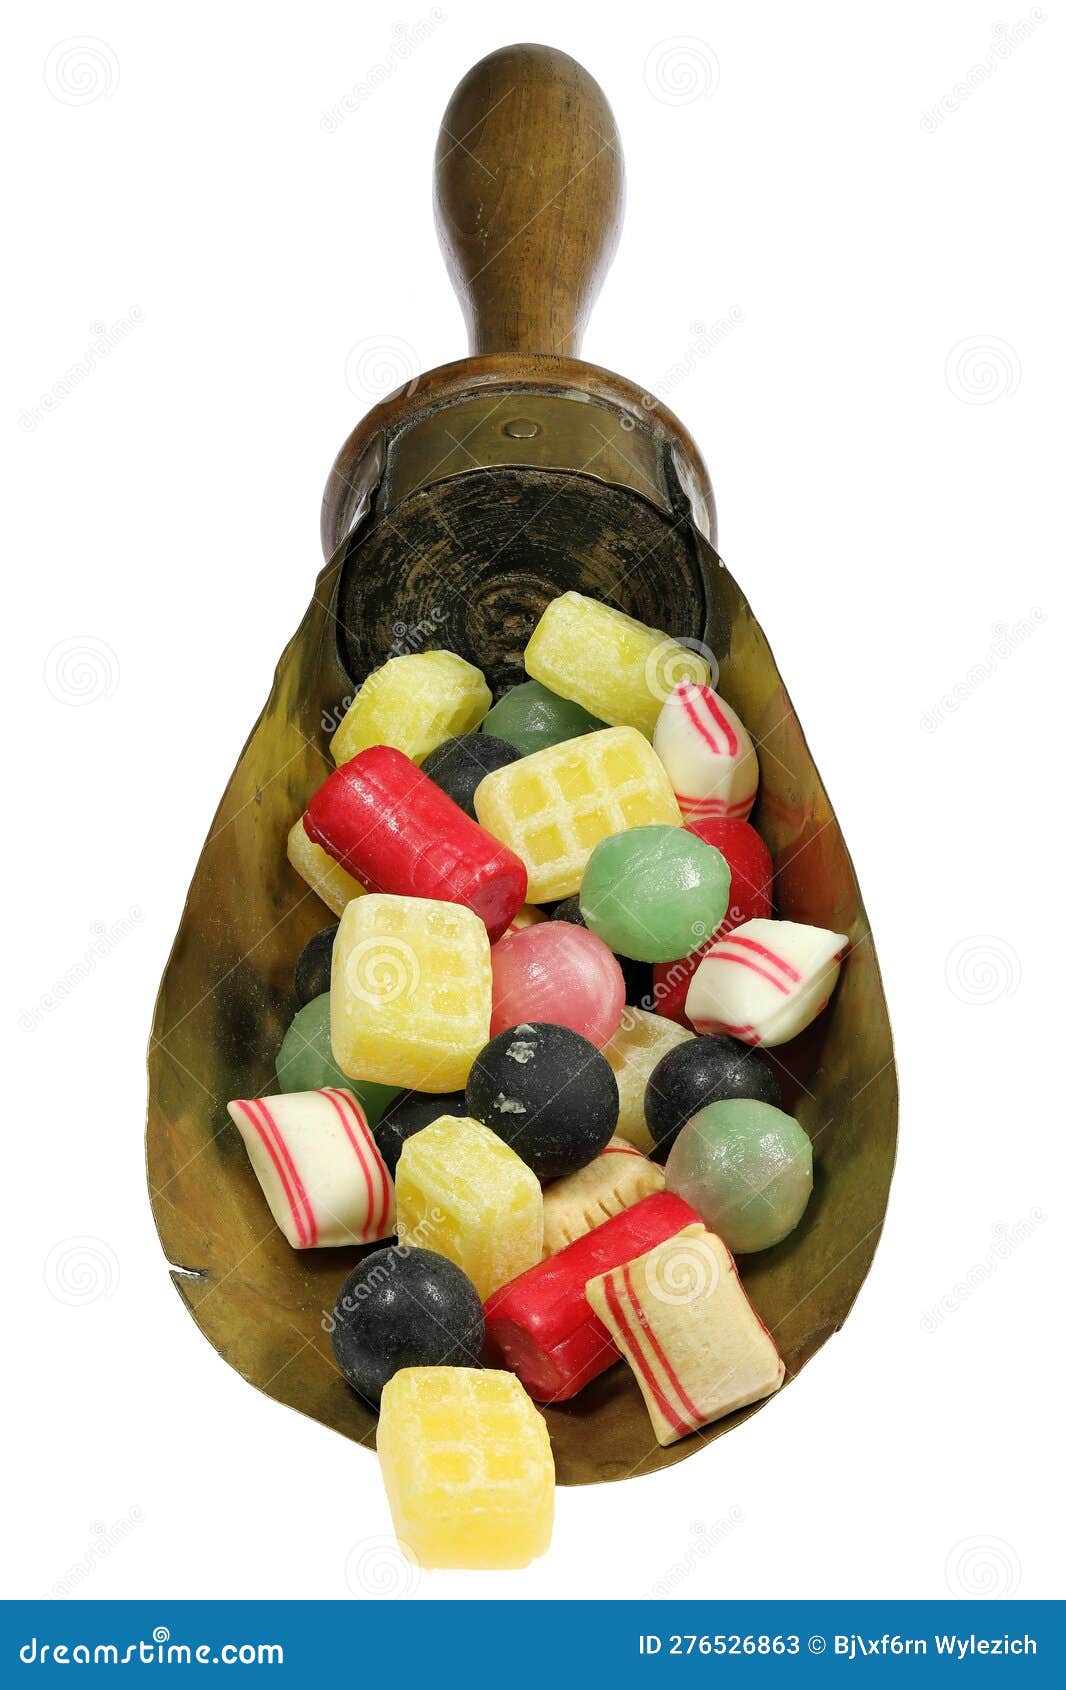 Tumtum - Old Dutch candy from grandma is our specialty, a variety